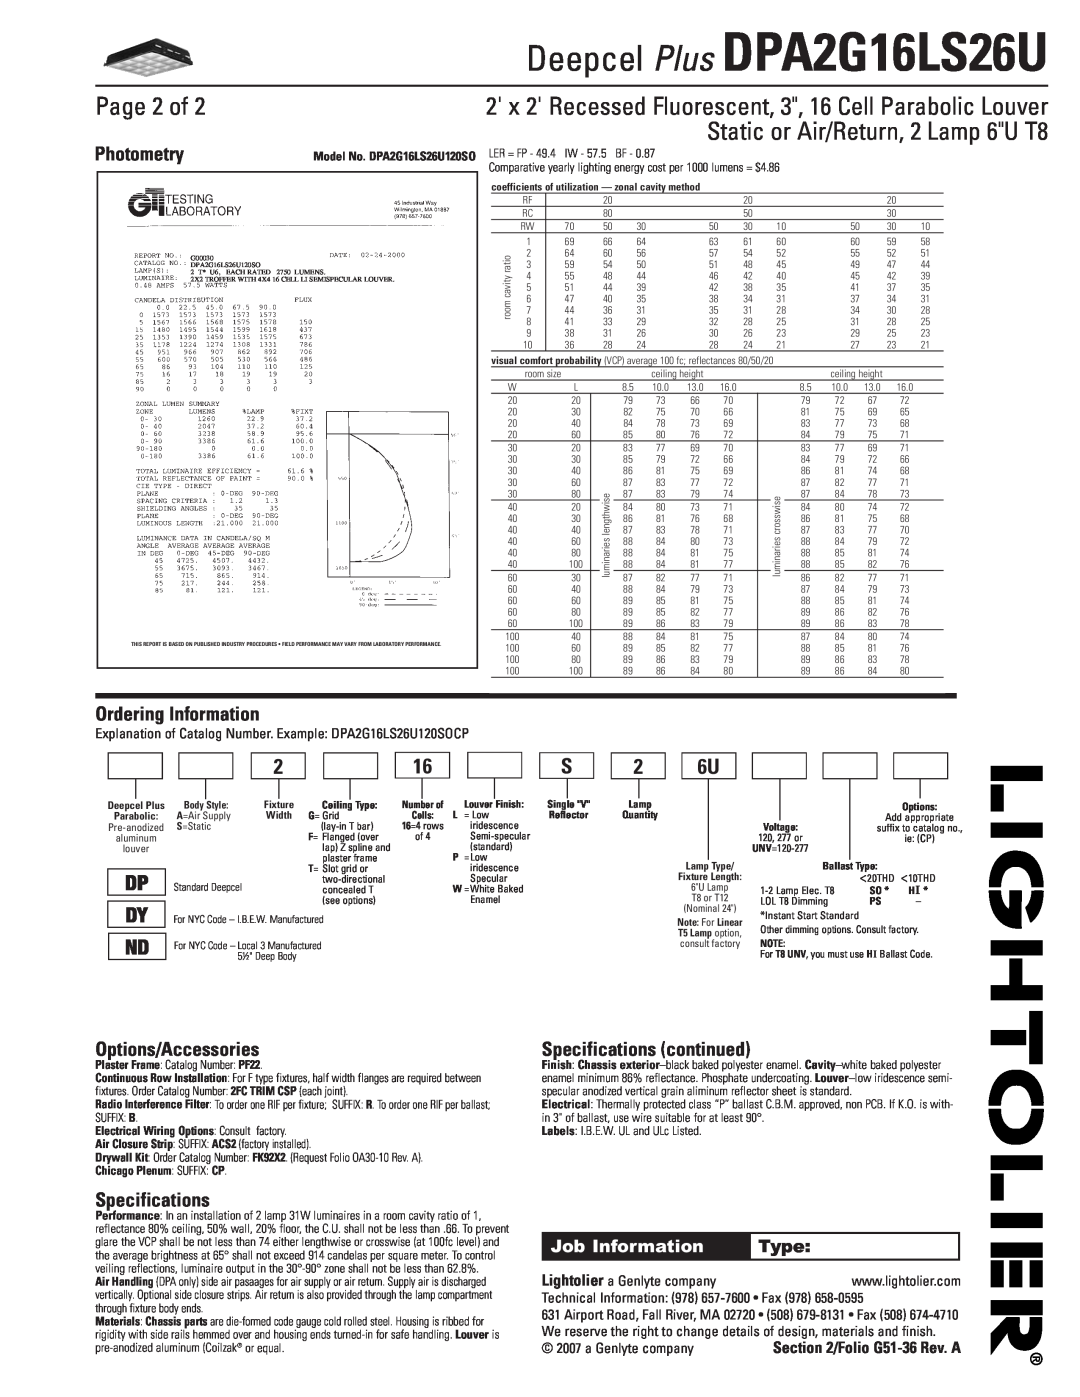 Lightolier DPA2G16LS26U Page 2 of, Photometry, Ordering Information, Options/Accessories, Specifications continued, Type 